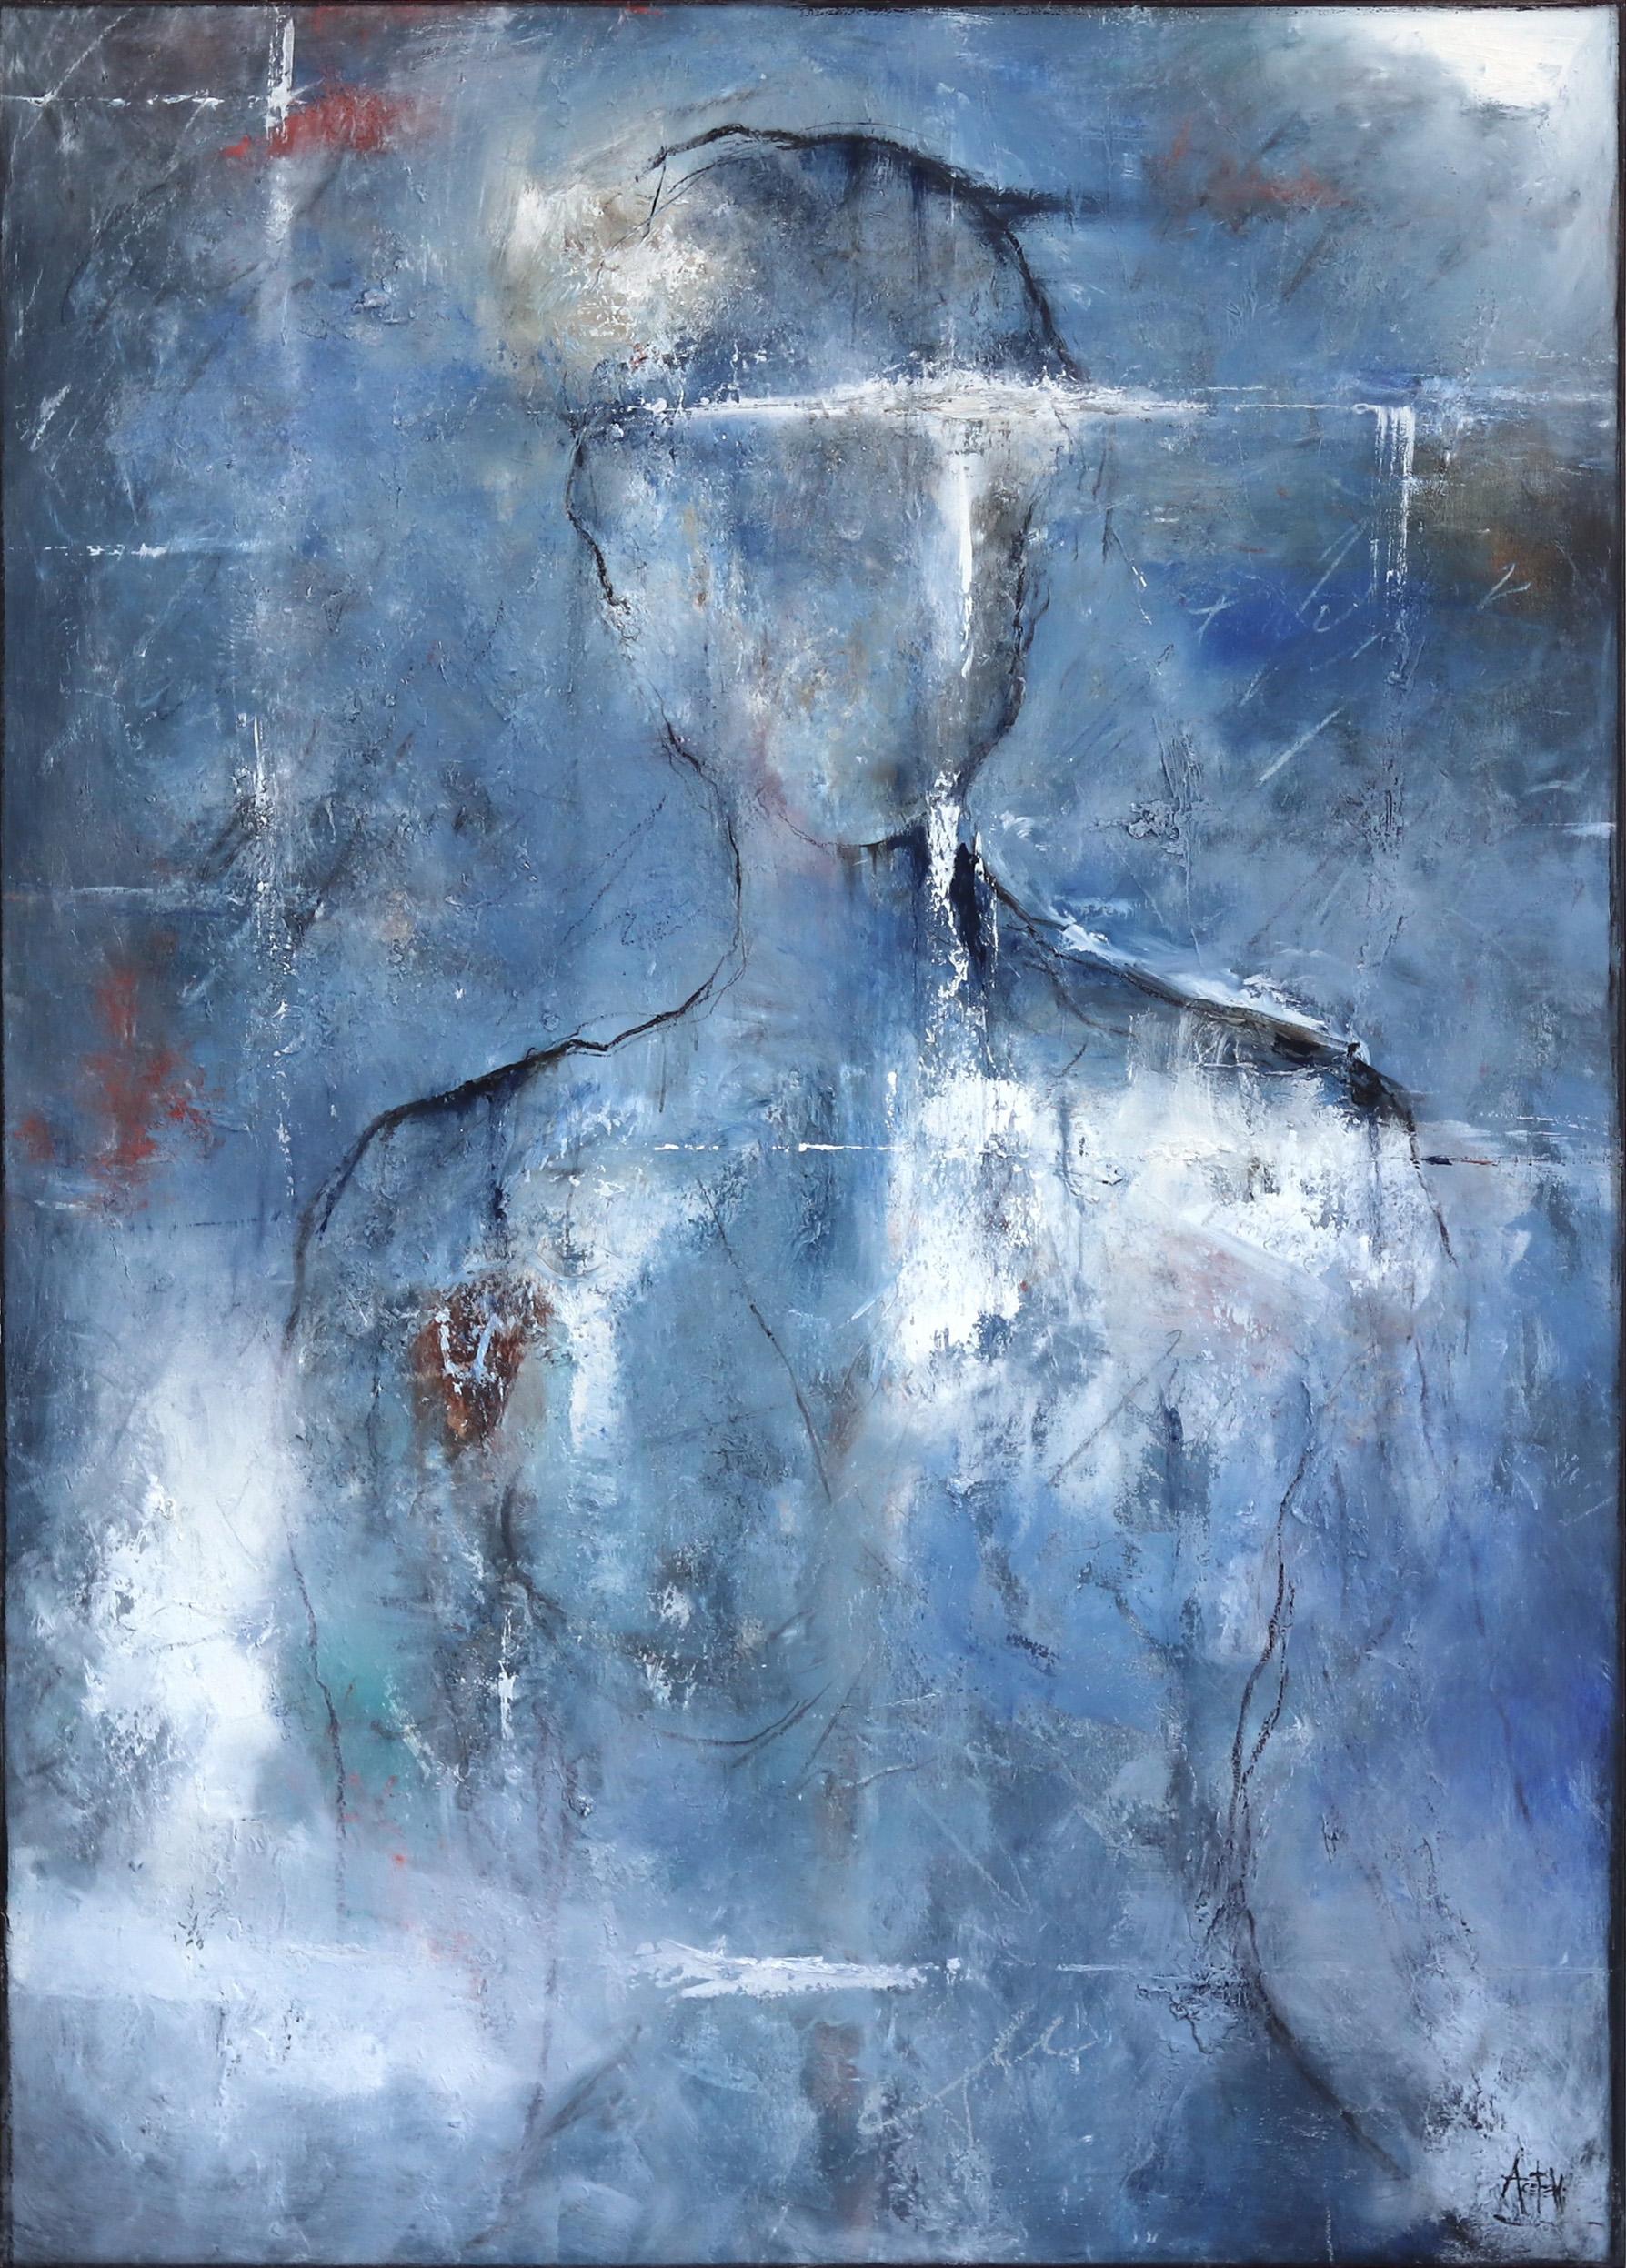 Meritage- Original Oil on Canvas Abstract Figurative Painting - Mixed Media Art by Mark Acetelli